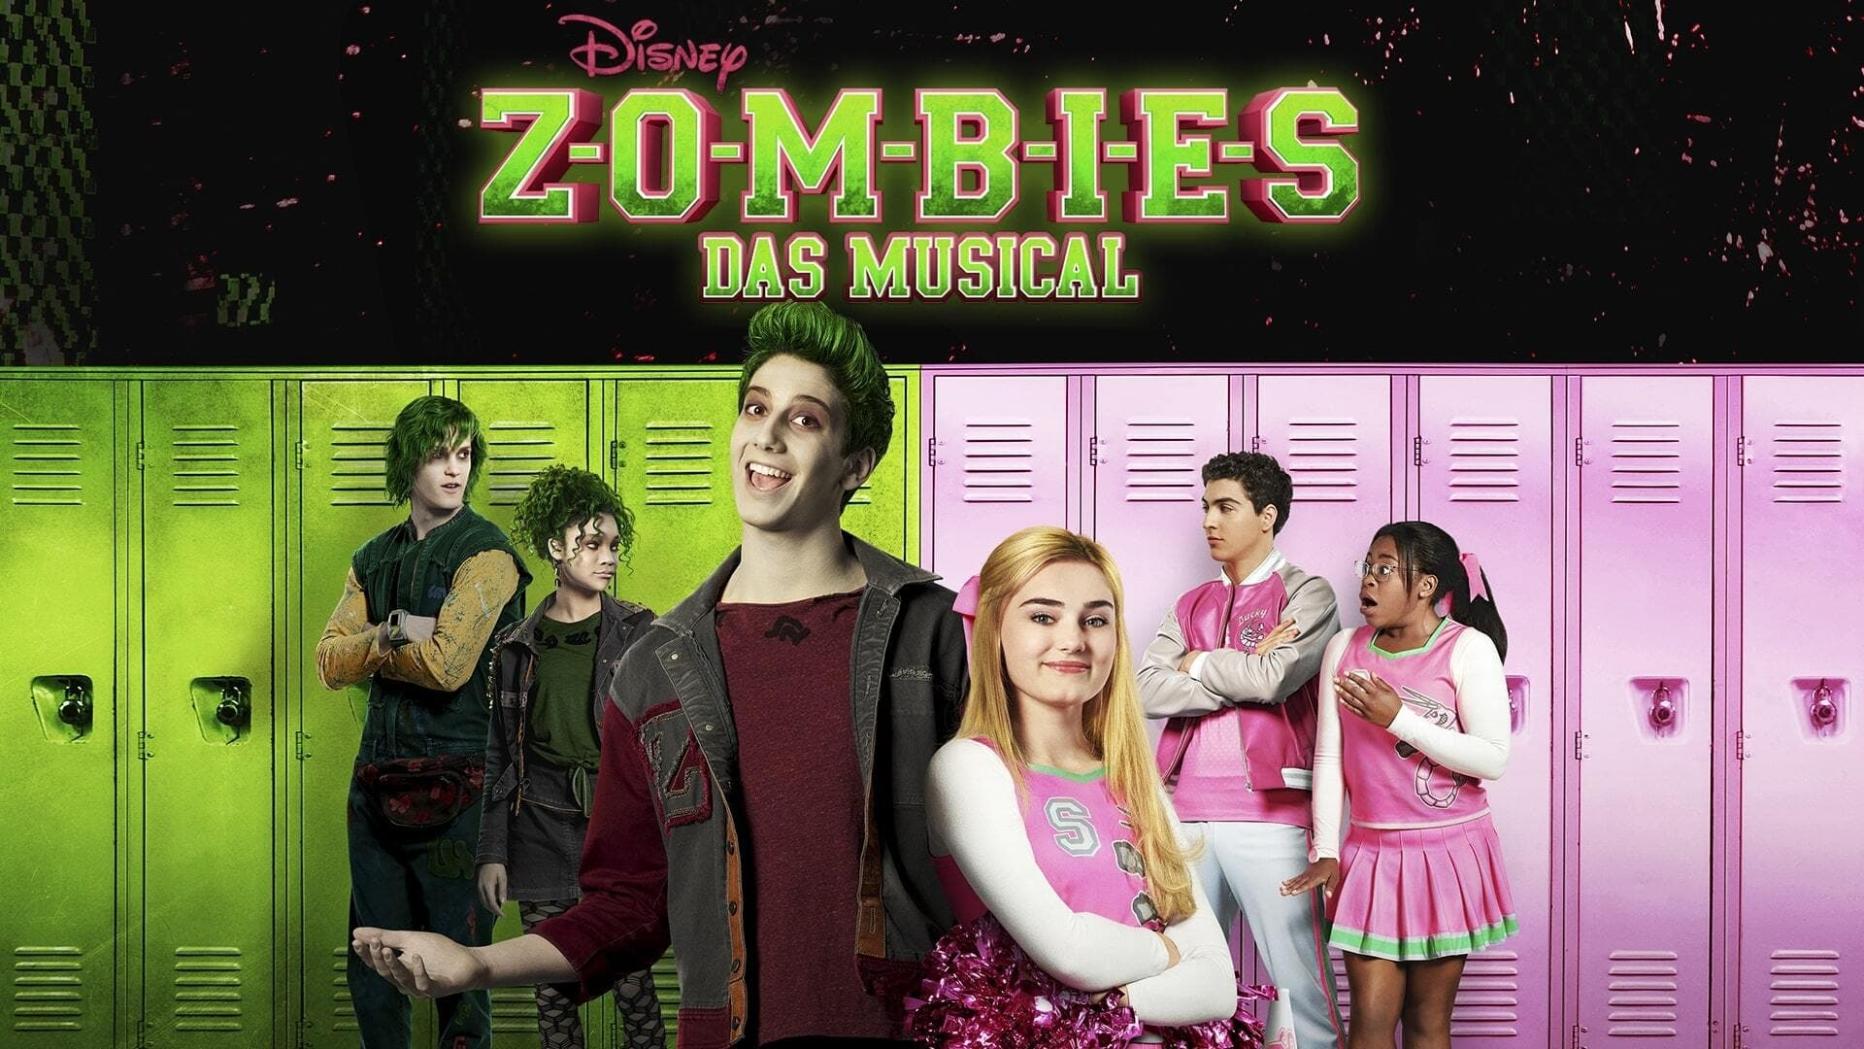 Zombies Das Musical film.at